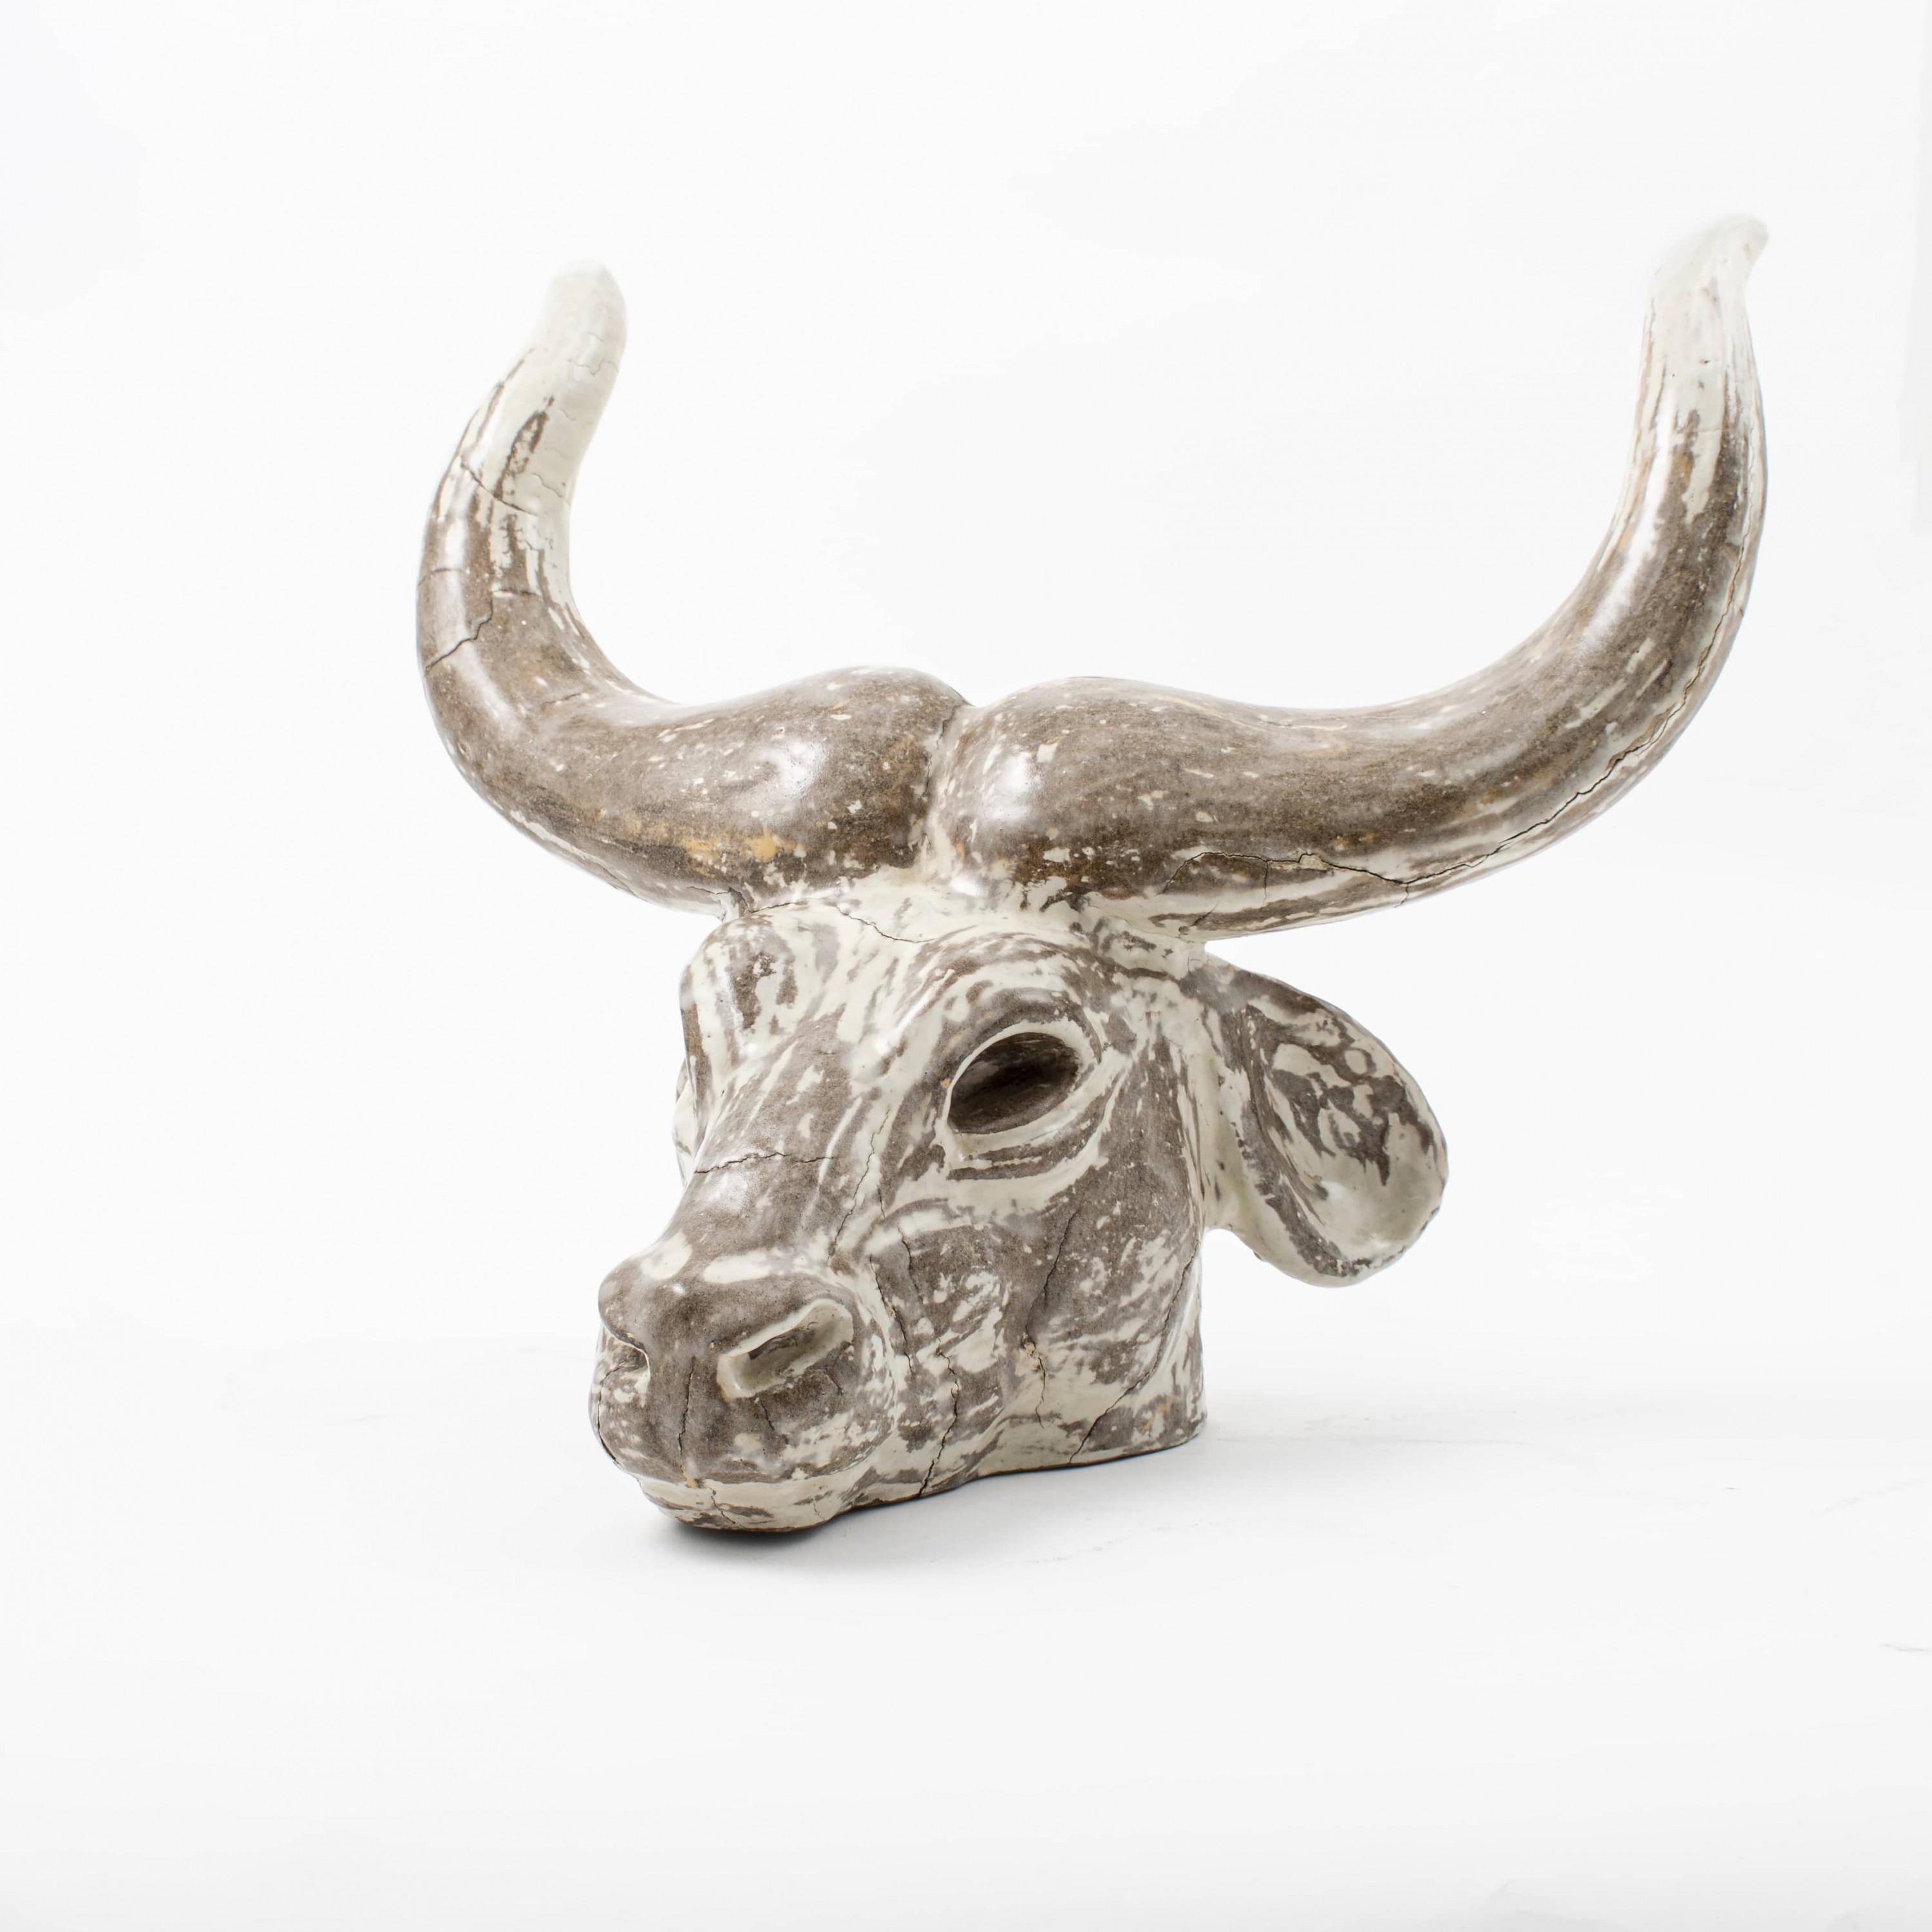 Einar Johansen 1915-1996.
Rare glazed stoneware Watussi ox head.
Signed with monogram EJ0.43. (1943).

The natural cracks are a result of the firing process.